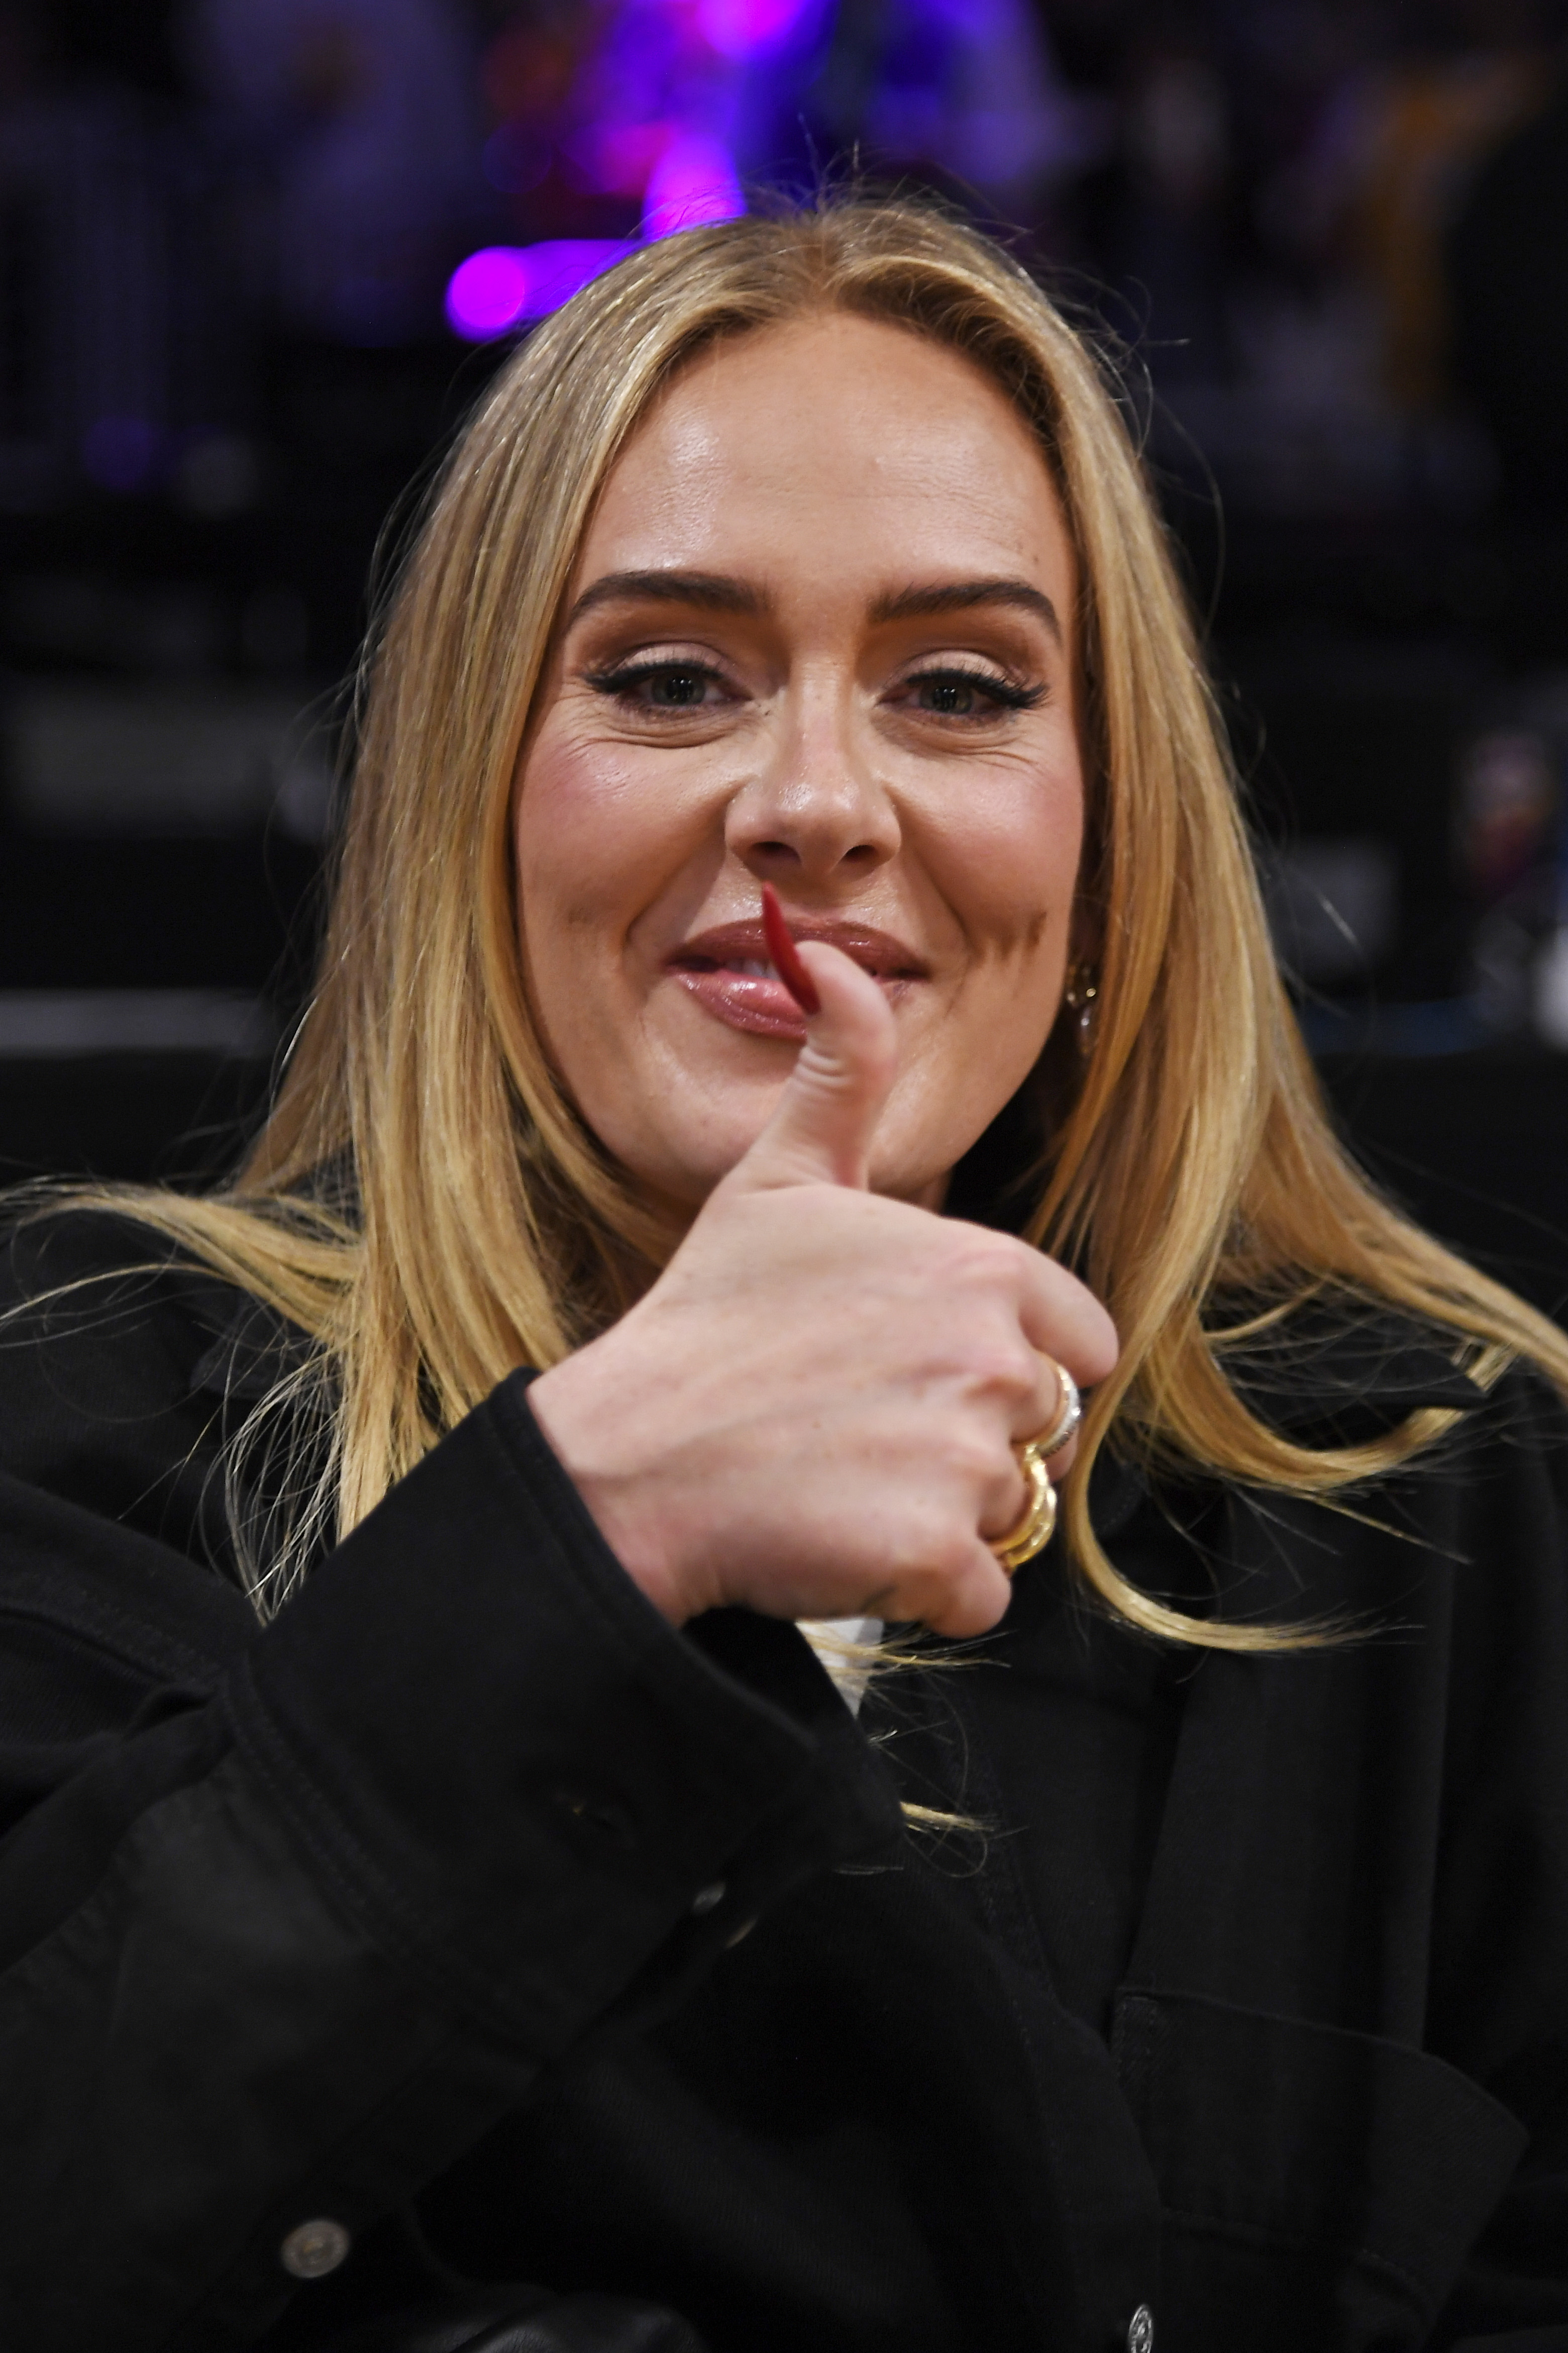 Close-up of Adele smiling and giving a thumbs-up